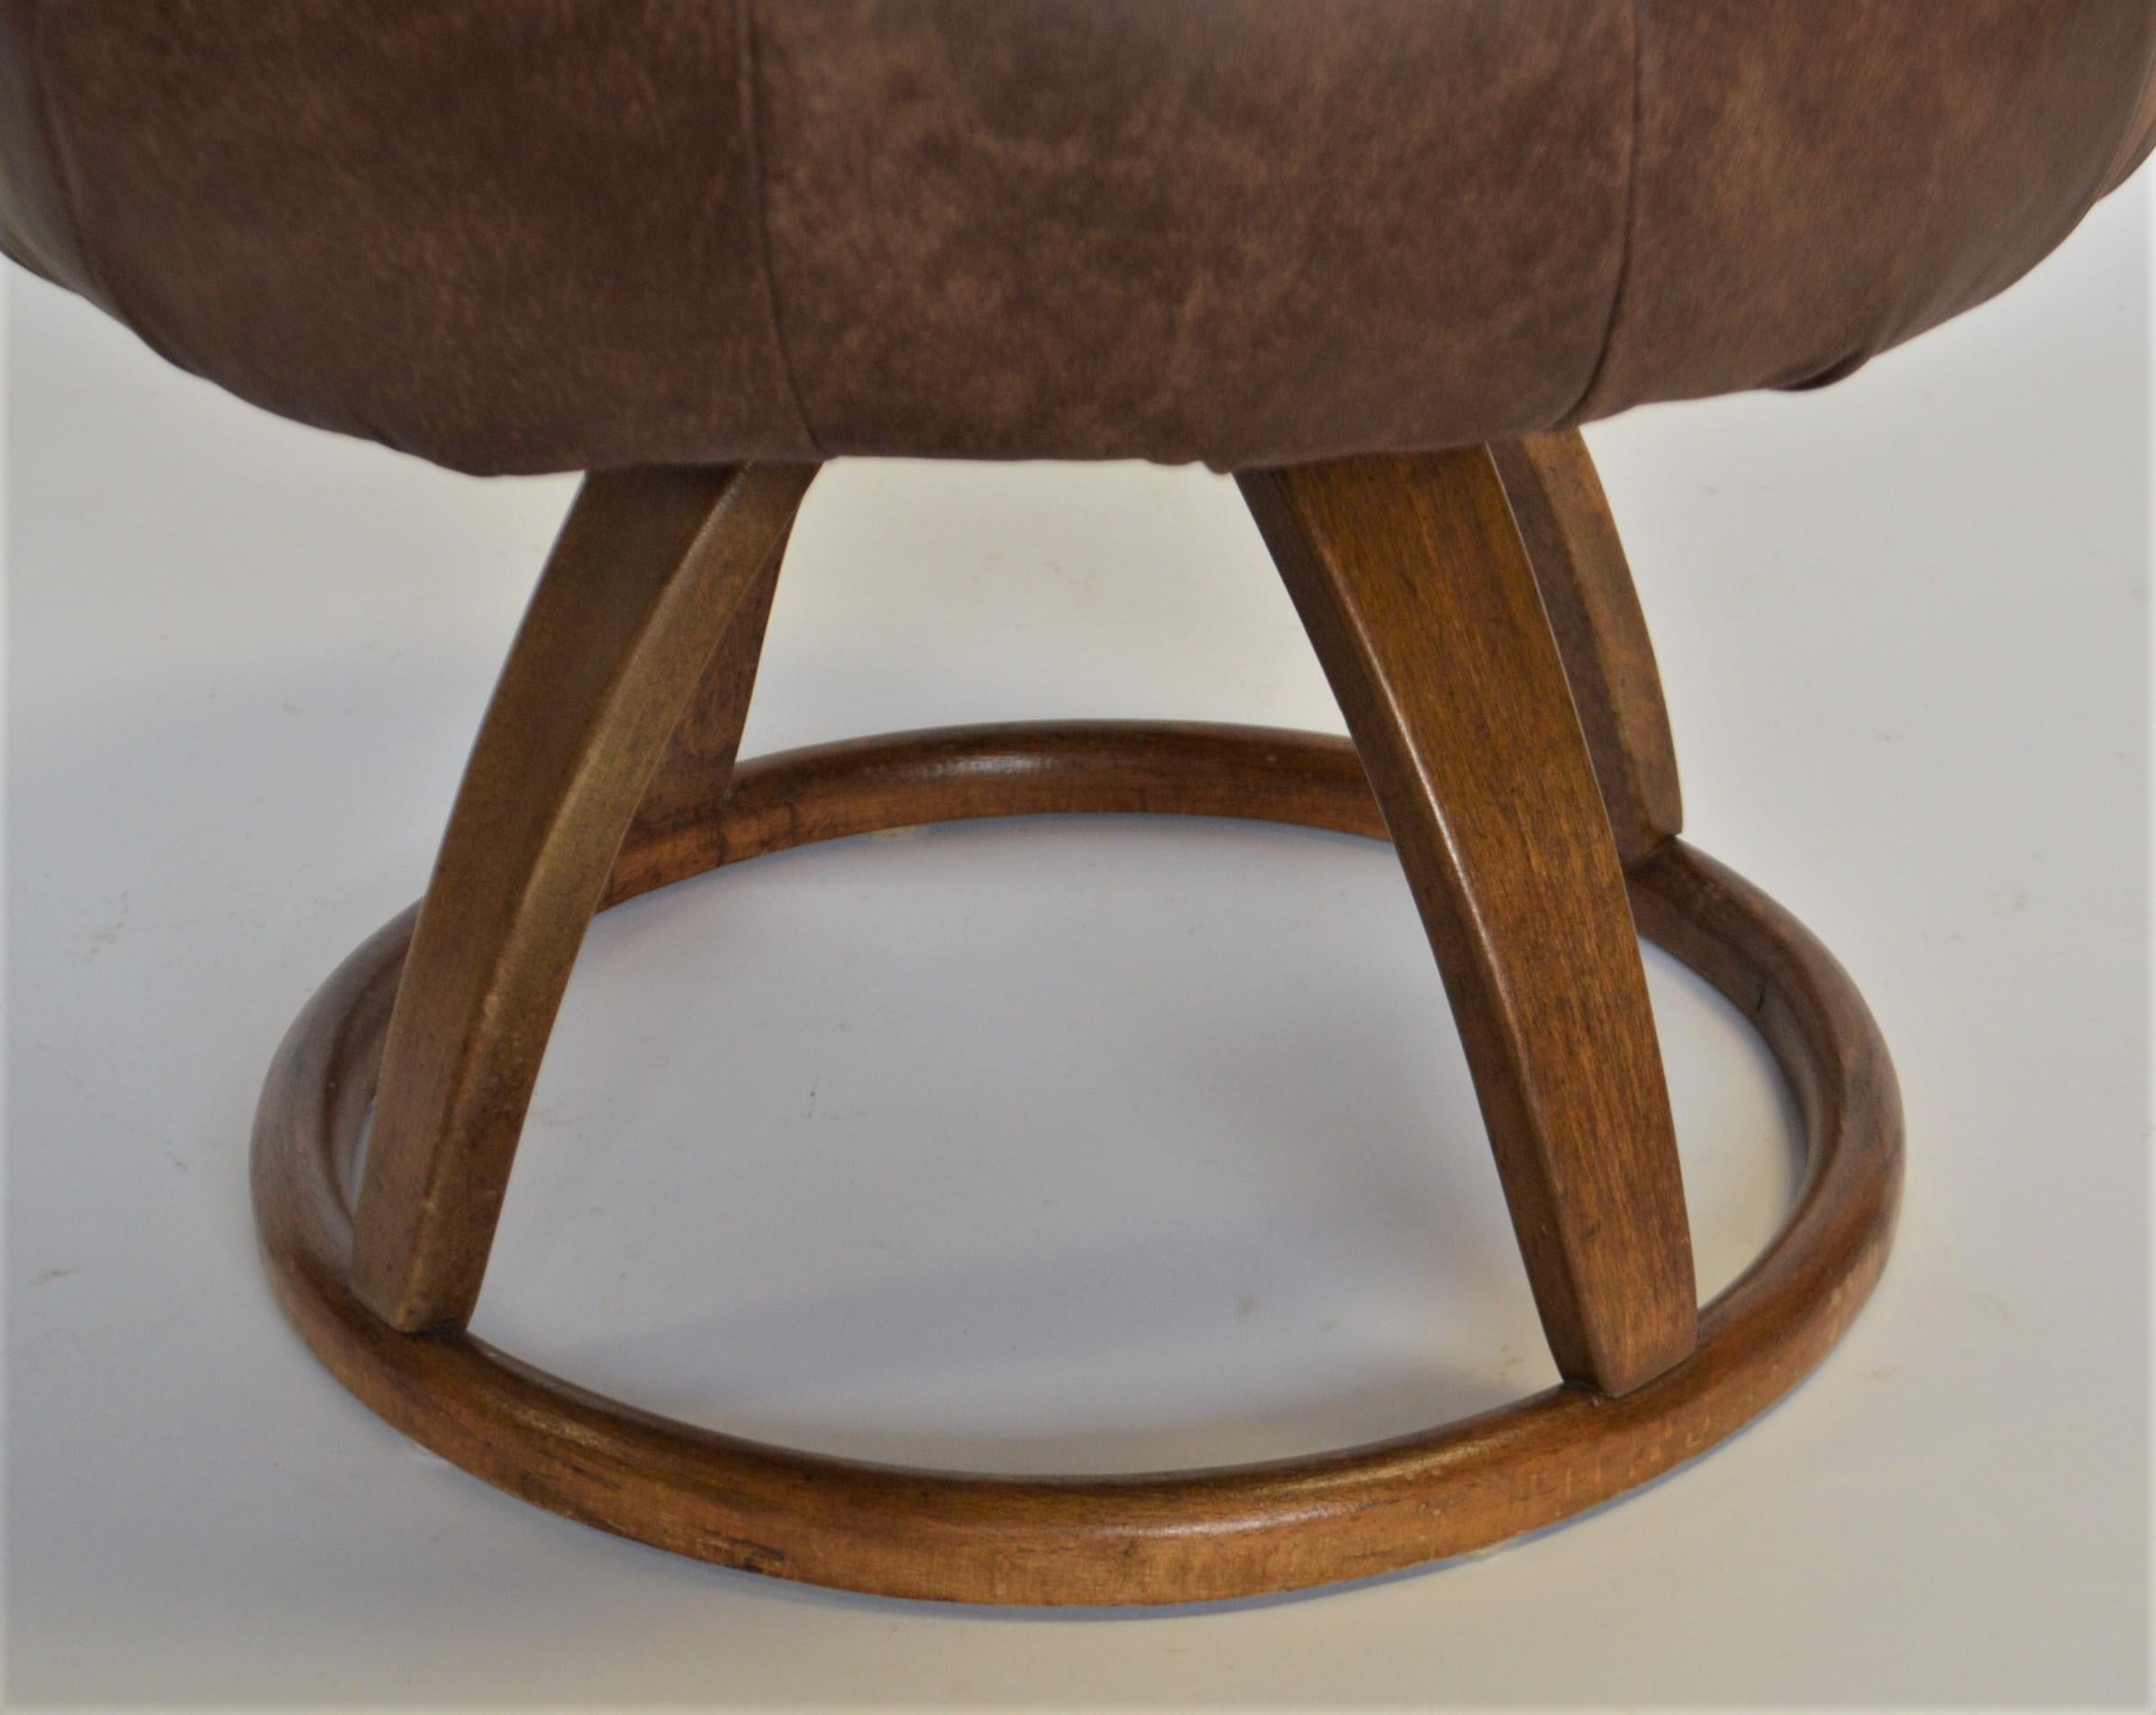 The base of this stool/ bench is a Bentwood production made around 1929- 1930.
The base has the swivel mechanism. The upholstery has been newly done using a distressed style new leather.